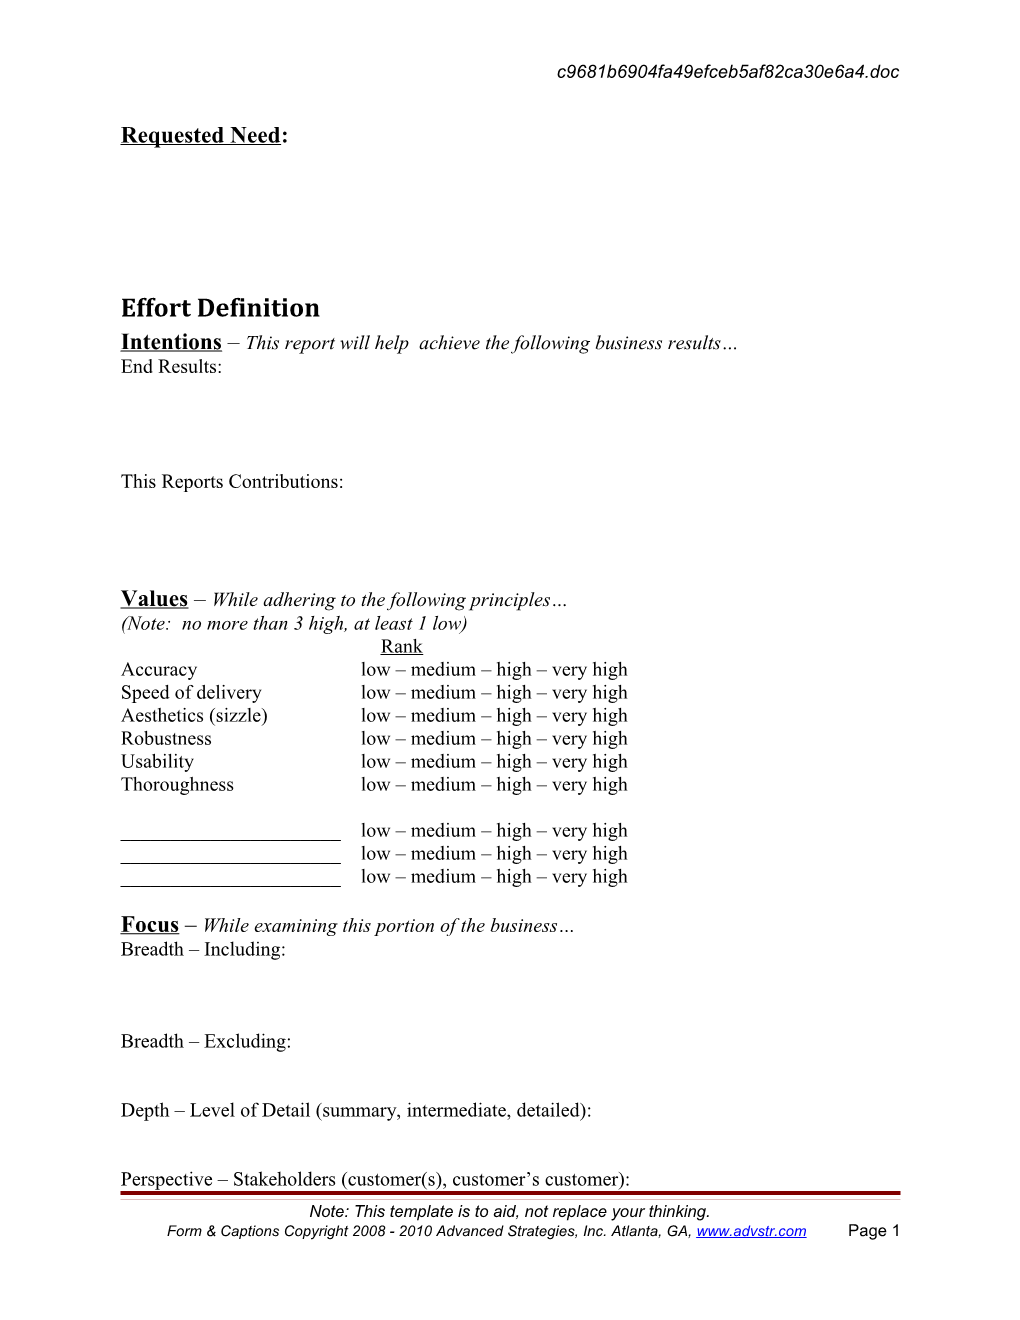 Napkin Report Study Phase Specification Template